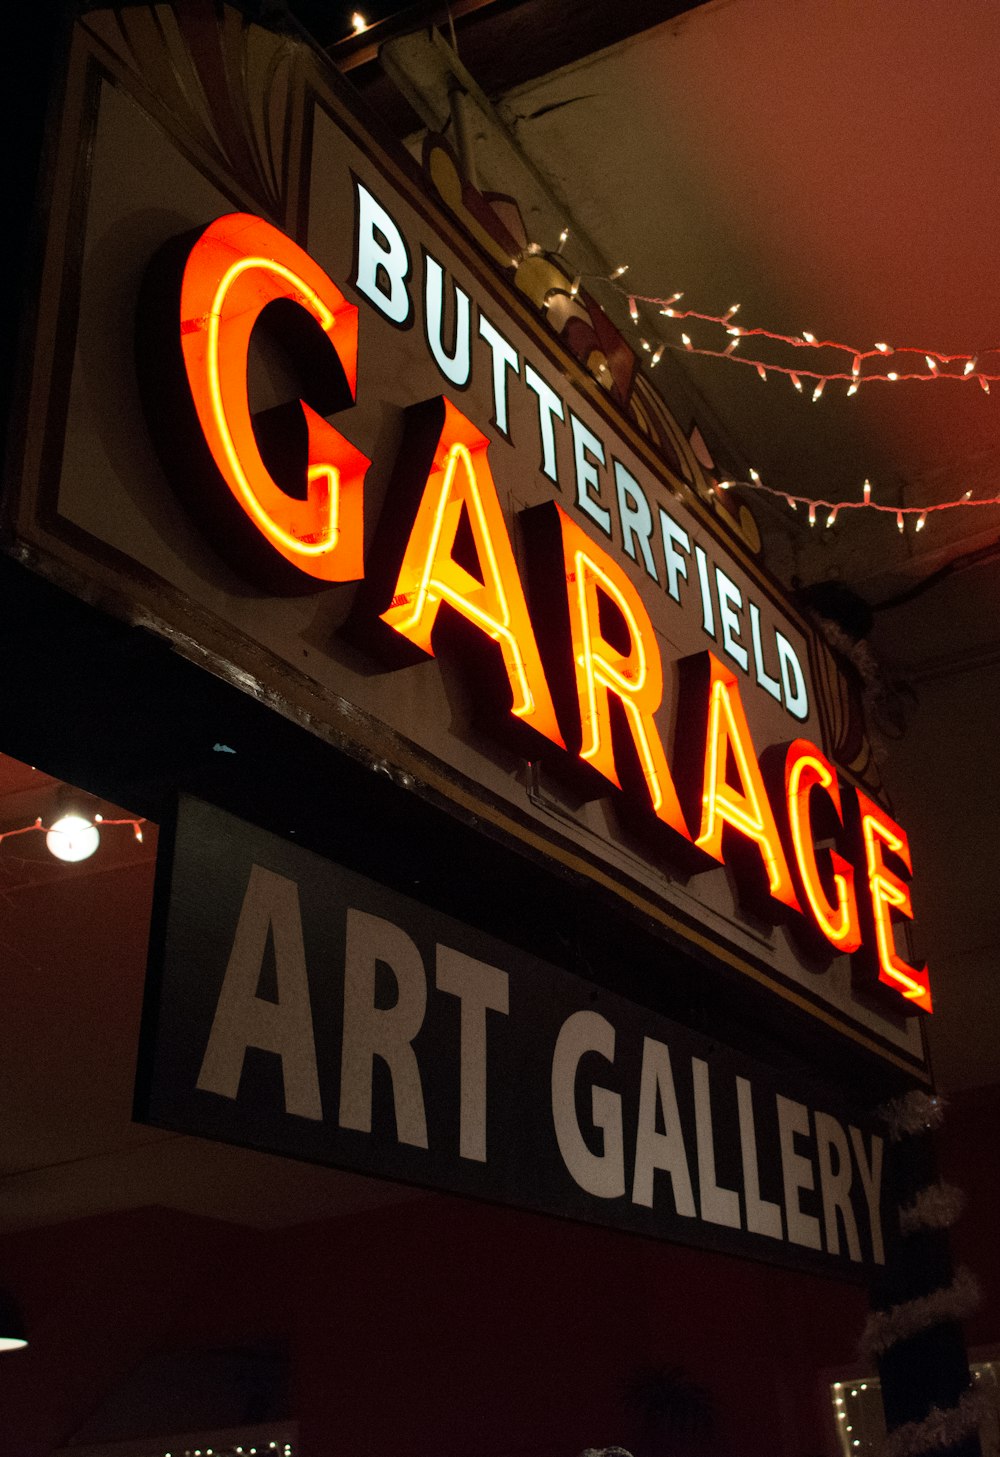 turned-on Butterfield Garage neon sign